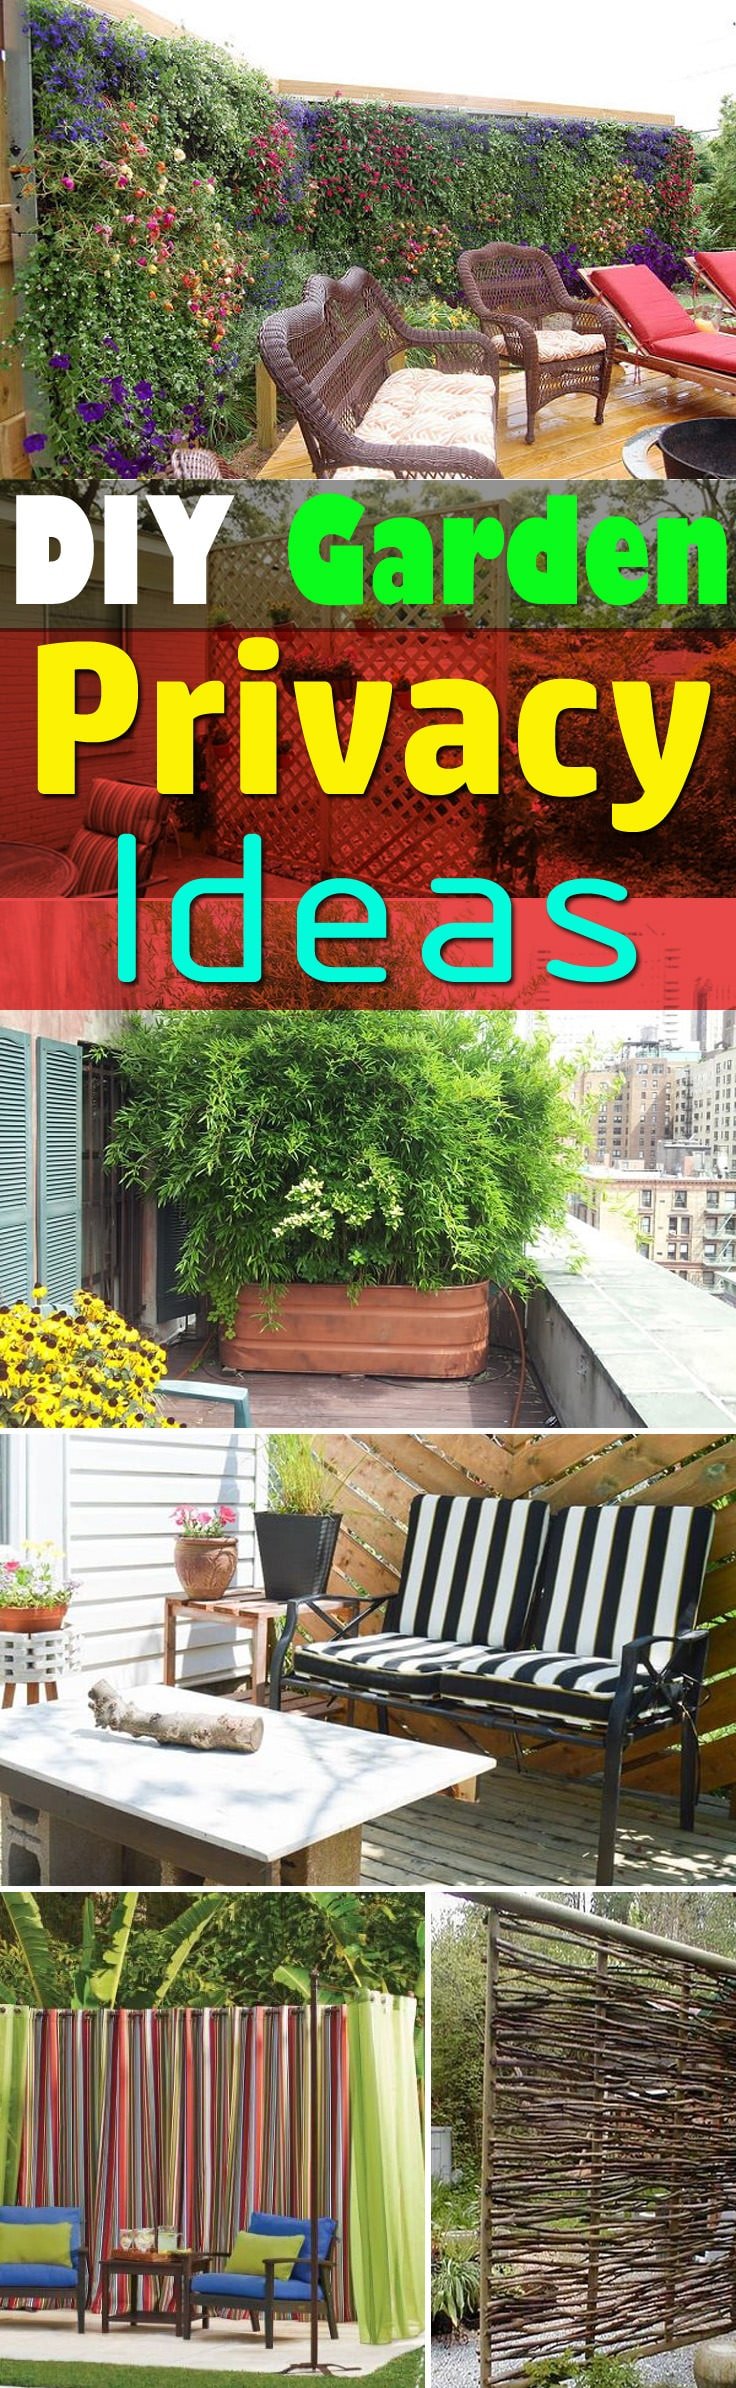 If you need privacy in your garden, the 26 DIY Garden Privacy Ideas here are worth looking at!